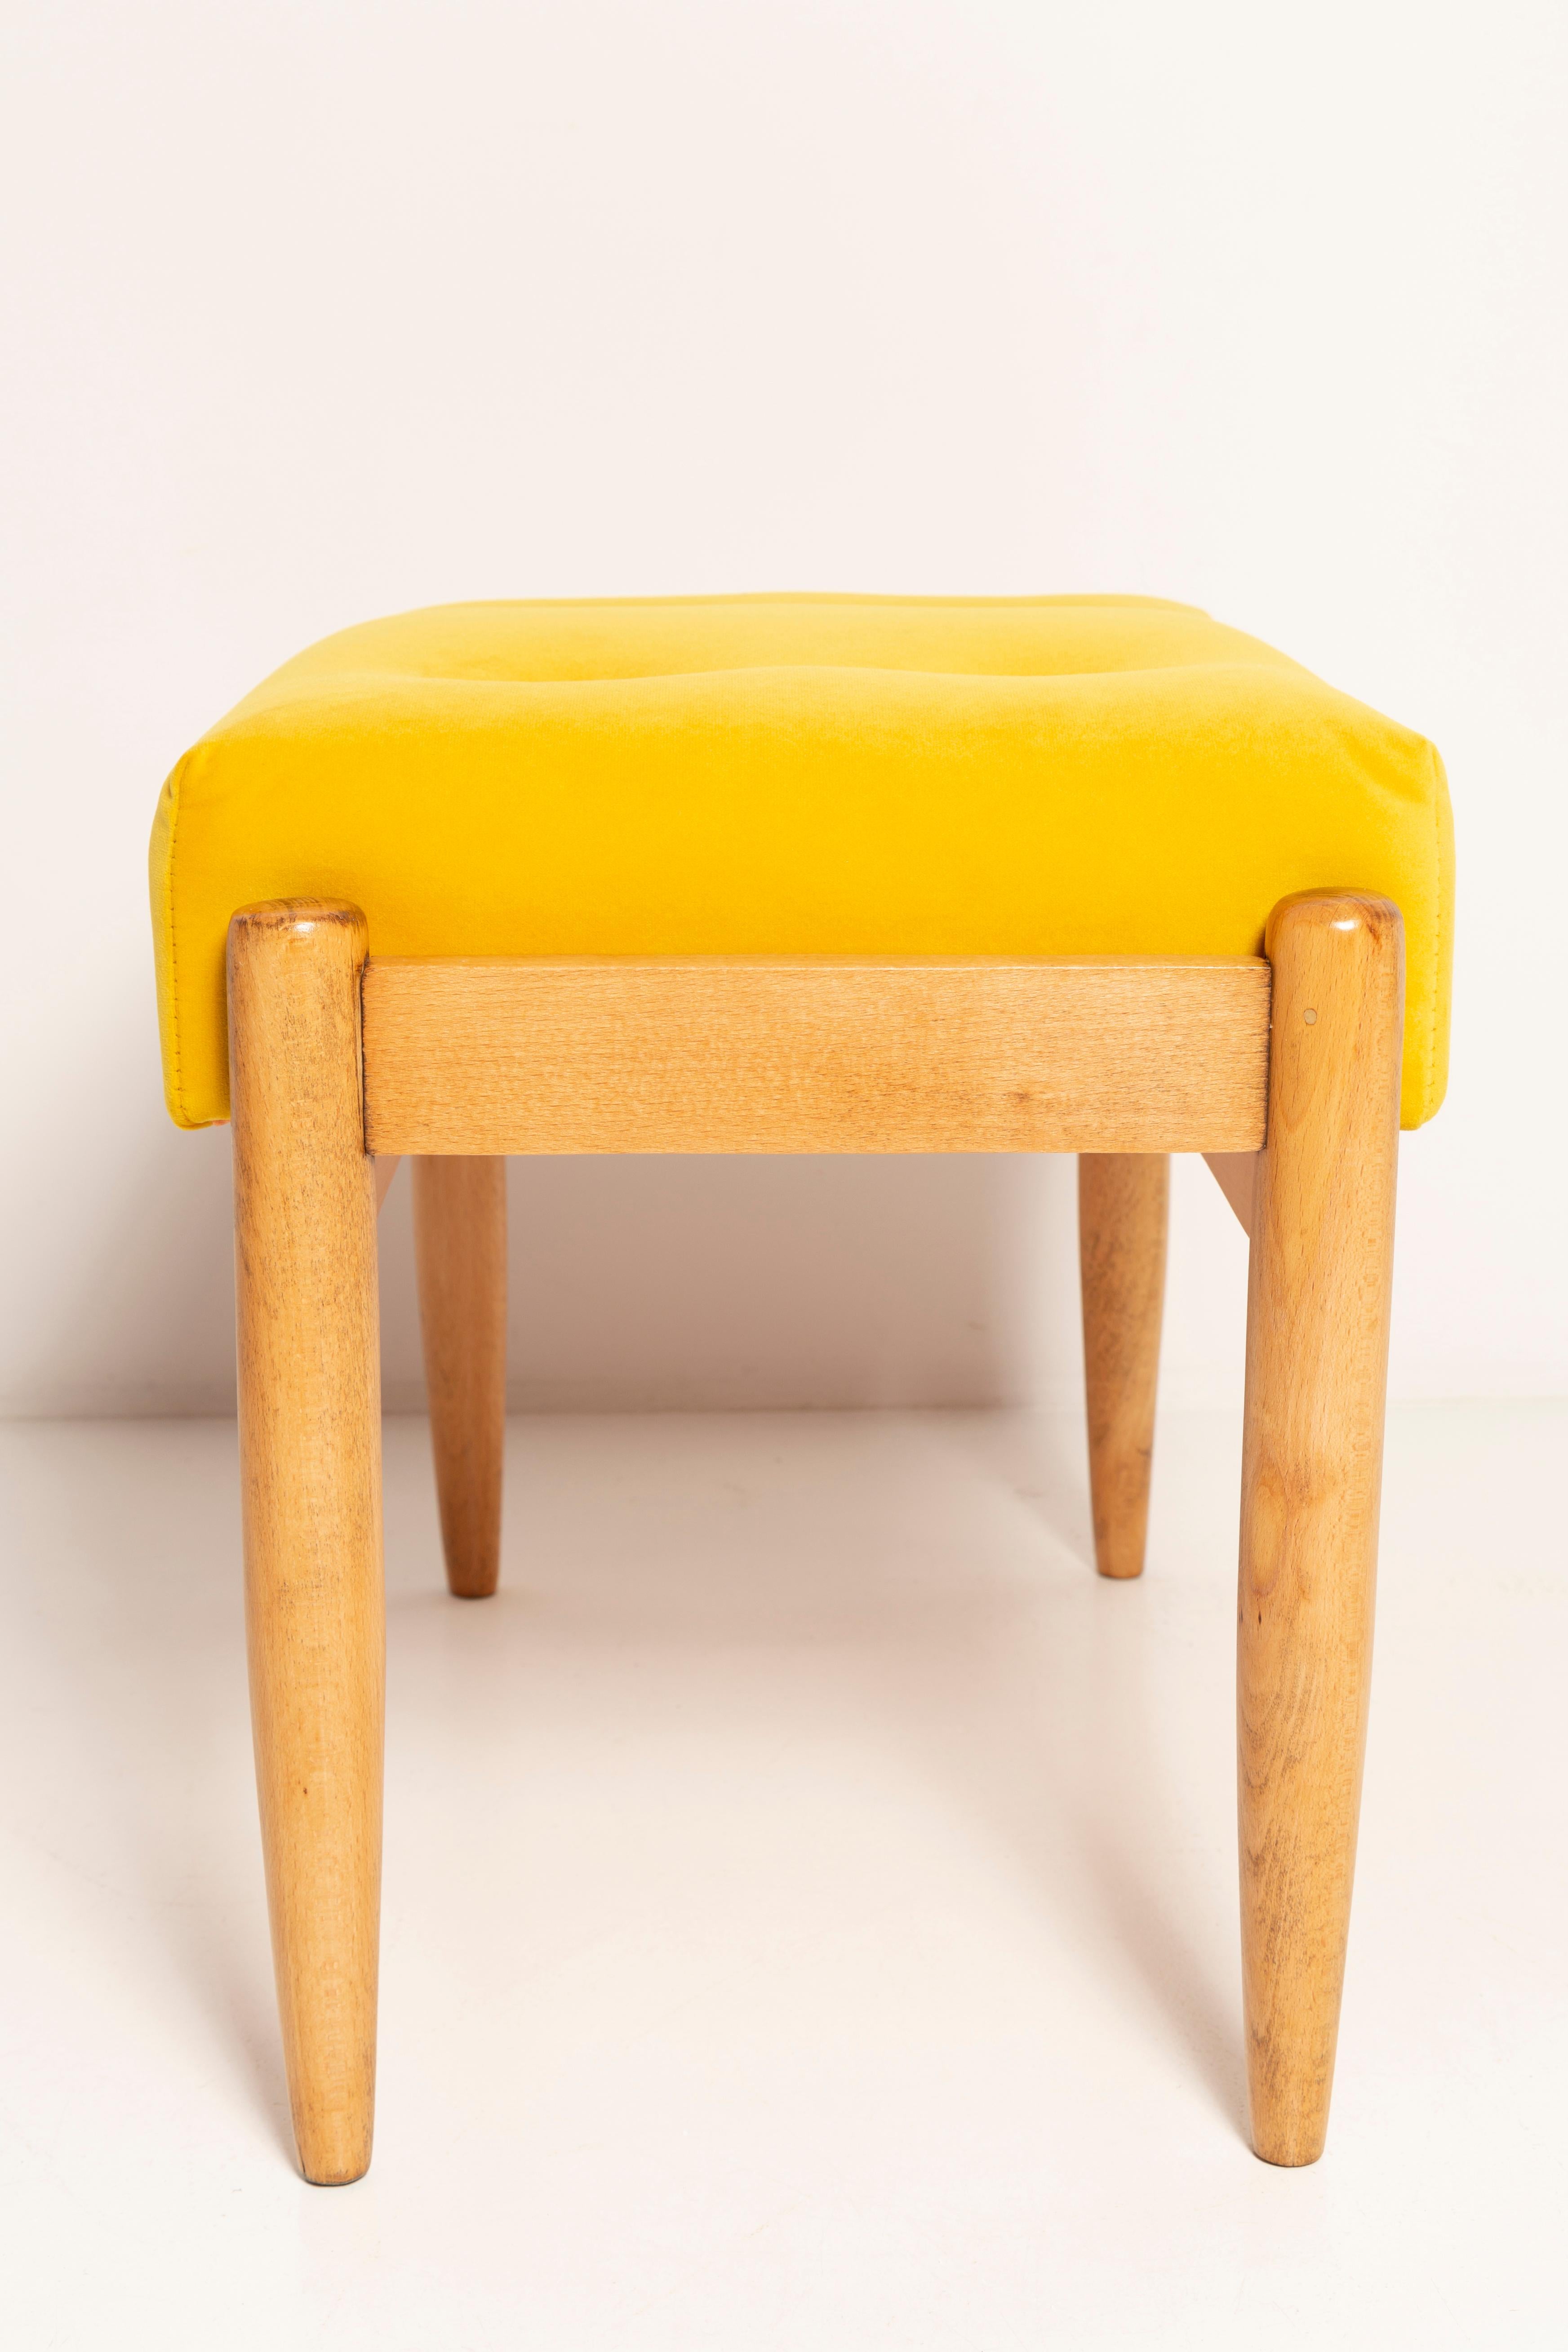 20th Century Set of Two Mid Century Mustard Yellow Vintage Stools, Edmund Homa, 1960s For Sale